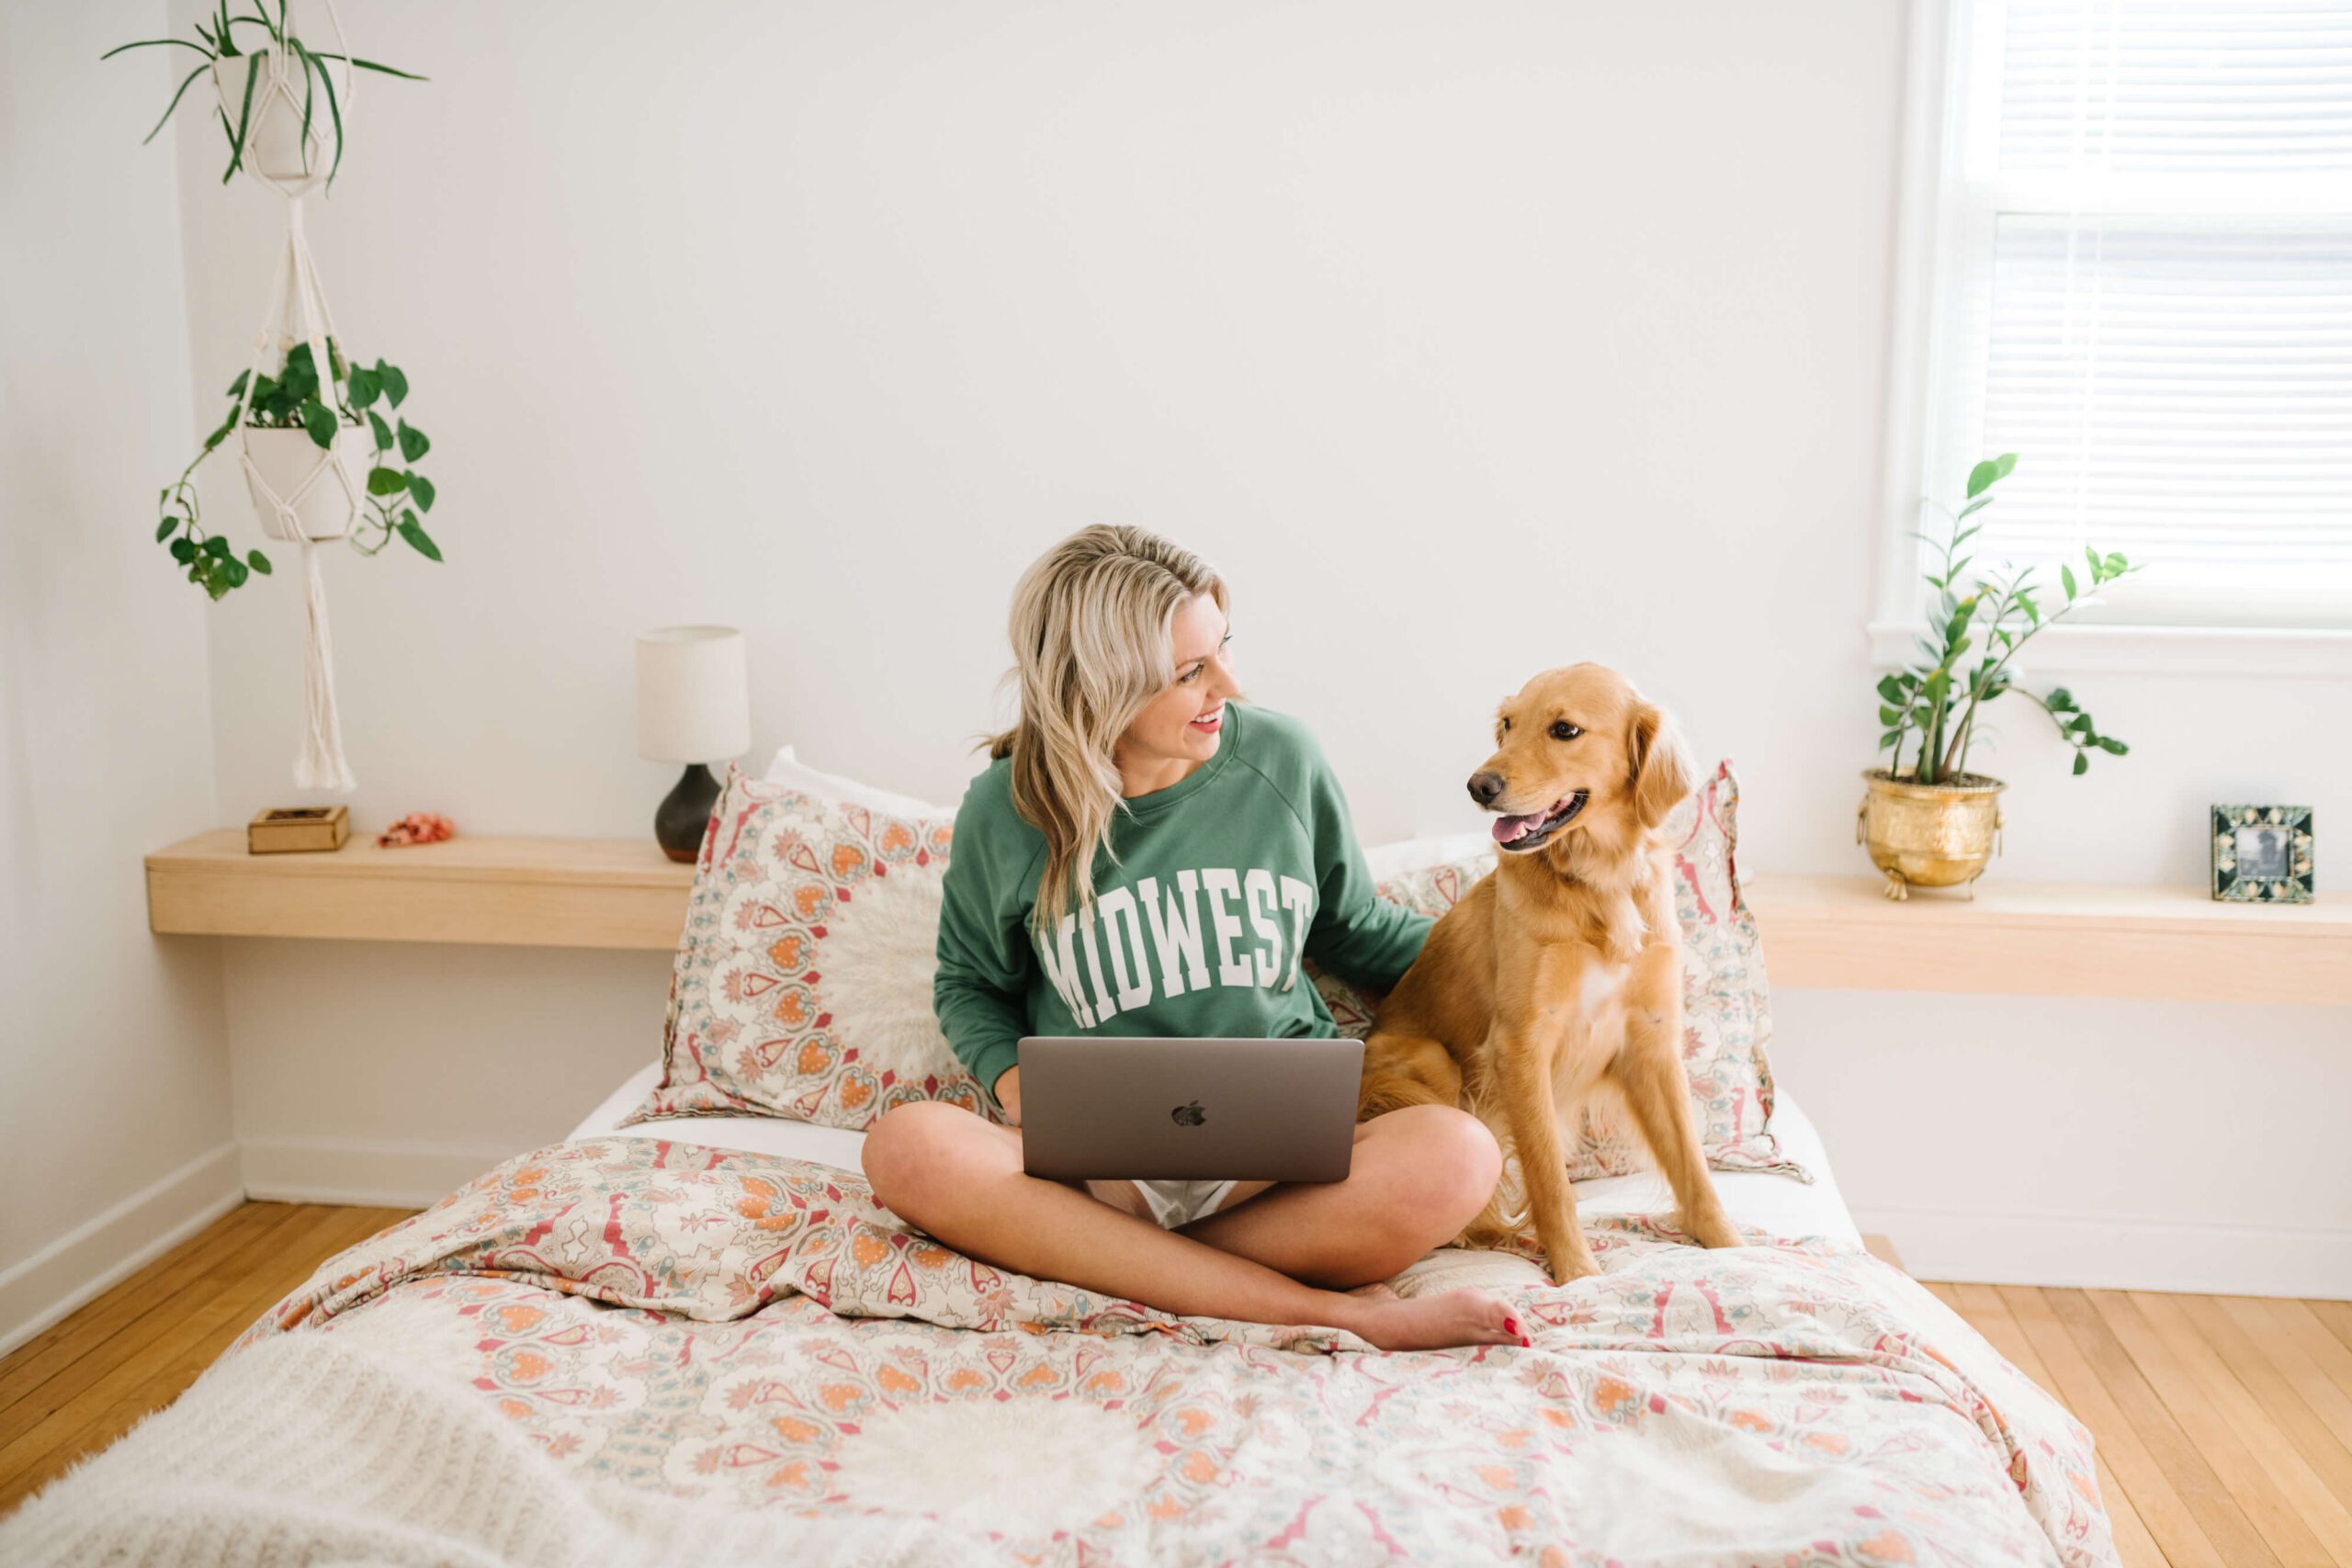 Sarah Klongerbo working on marketing copy with her dog Pali on a bed